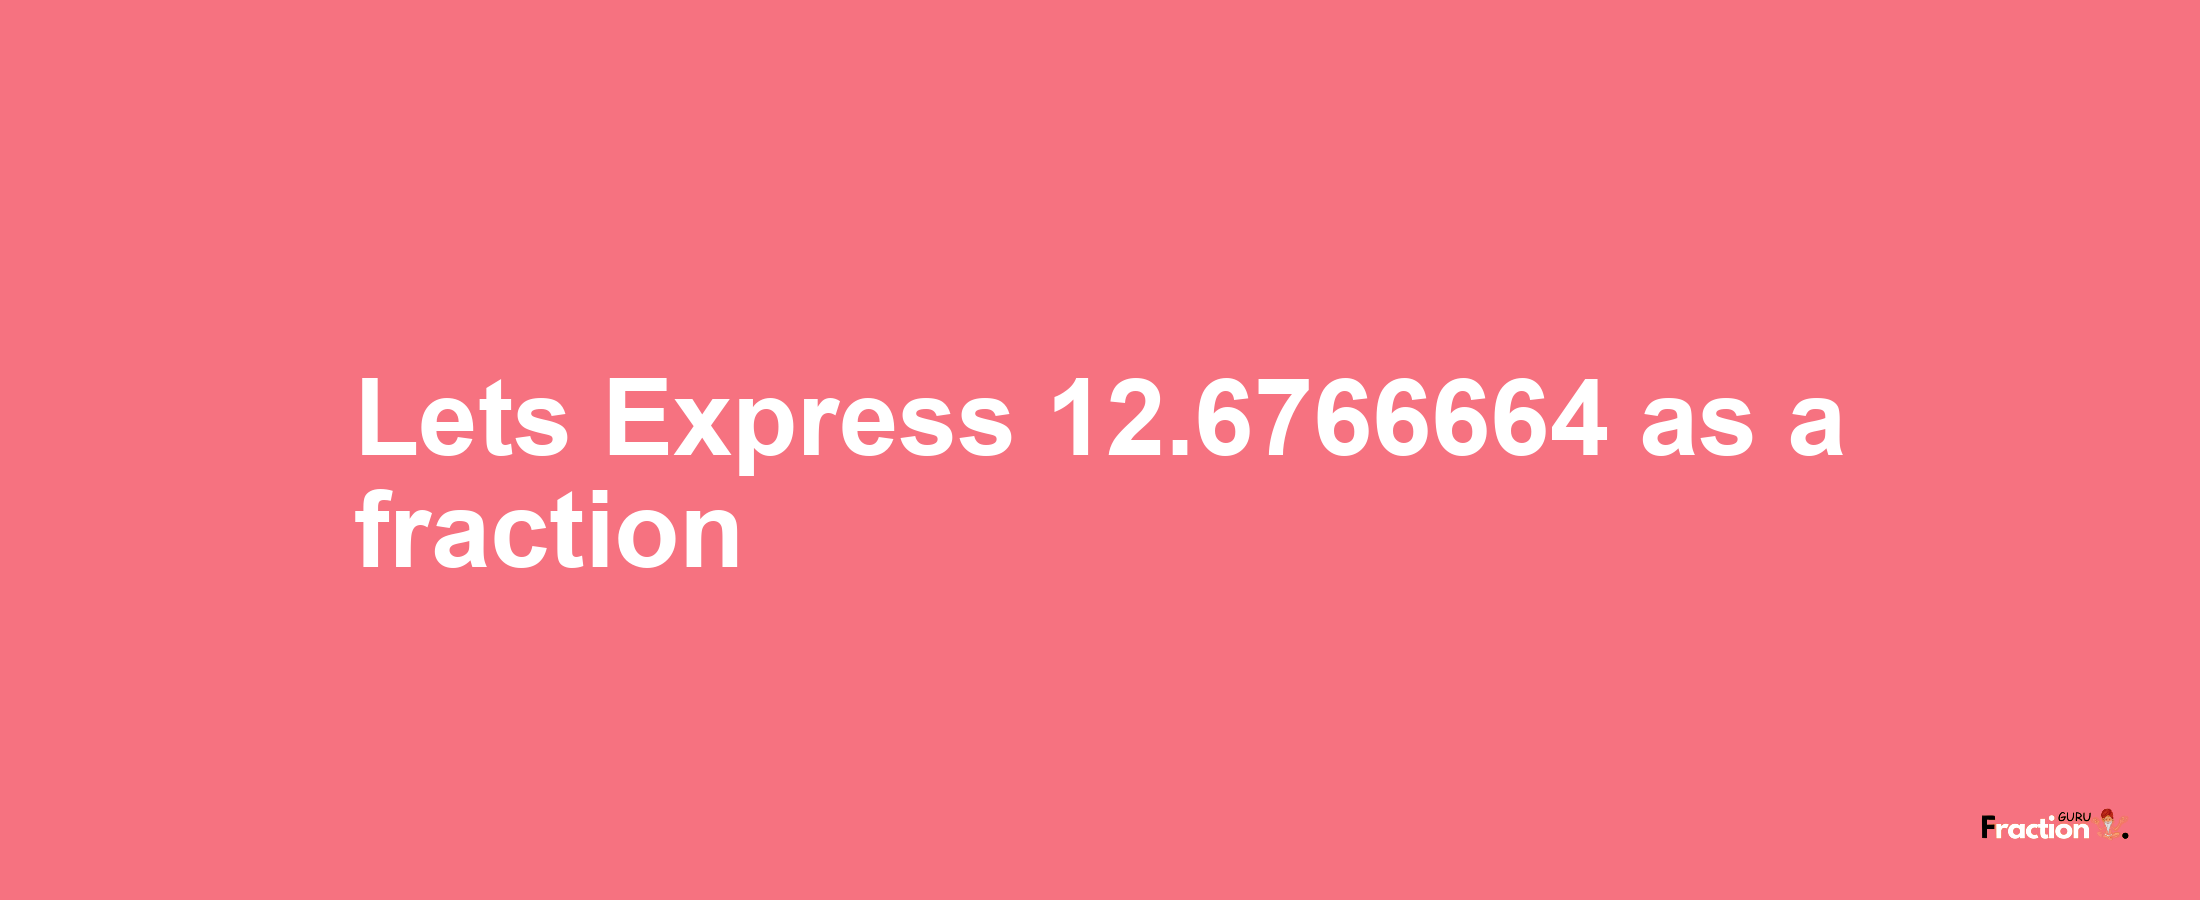 Lets Express 12.6766664 as afraction